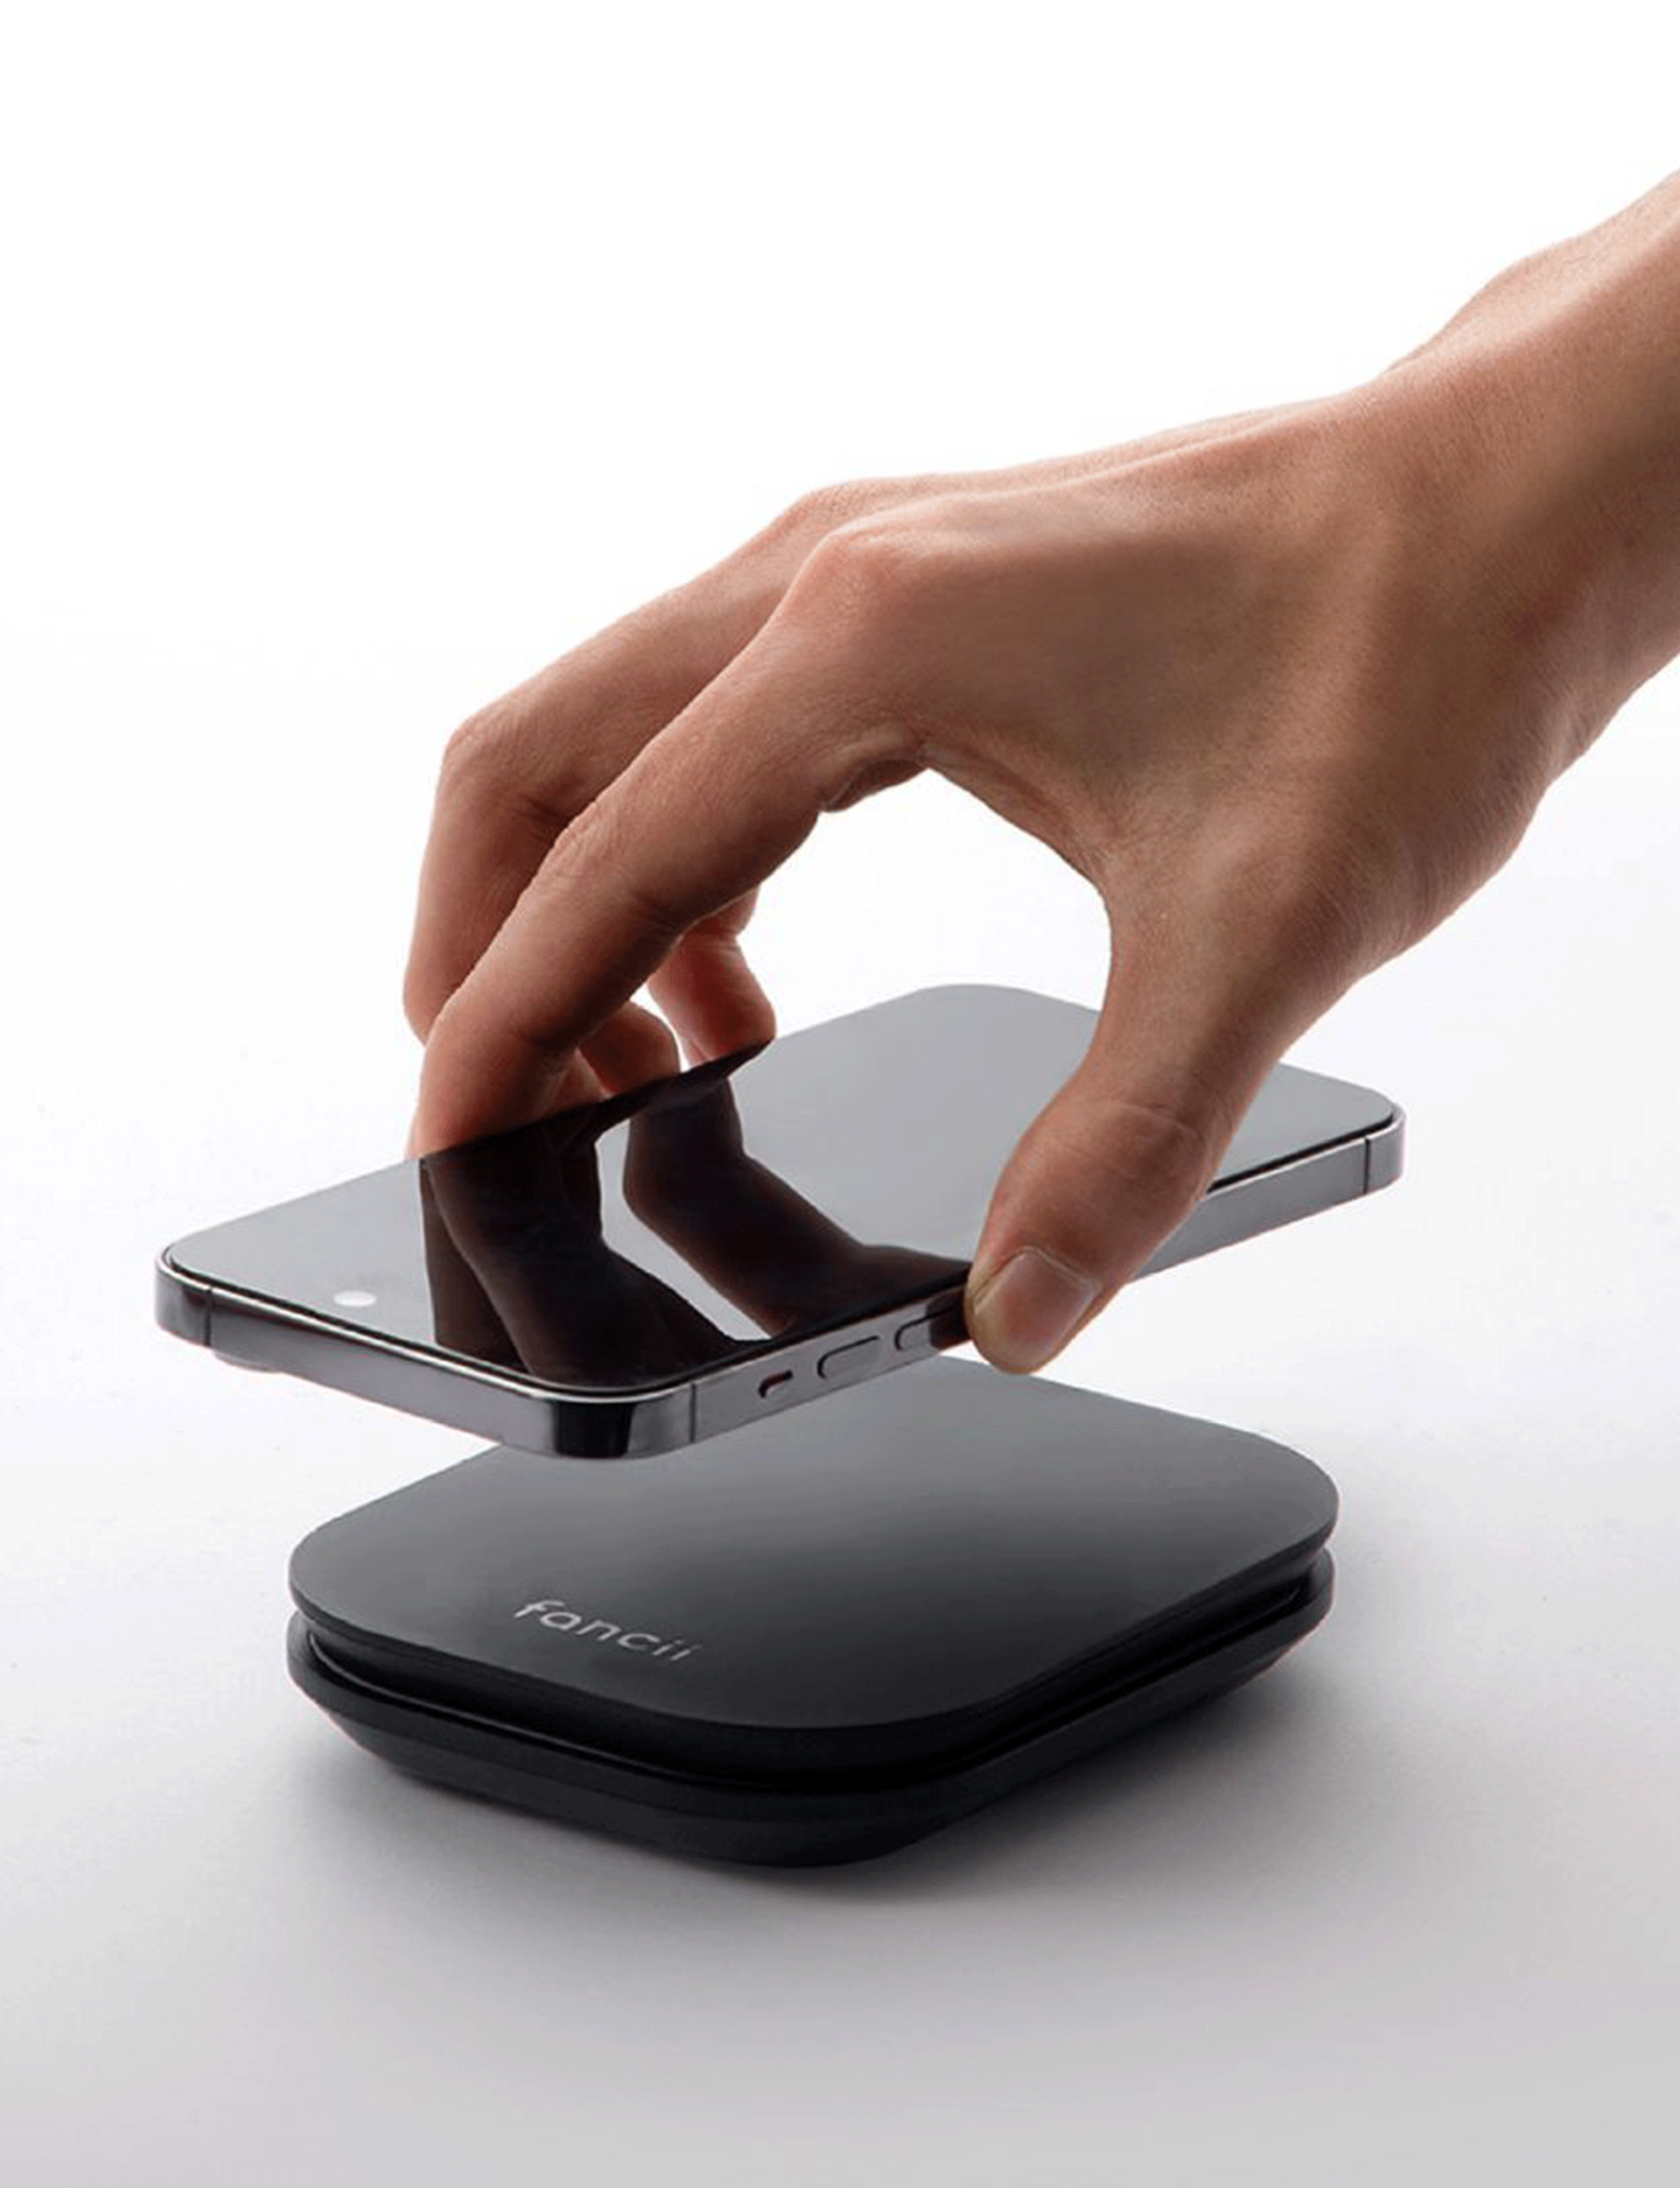 Wirelessly Charging the iPhone